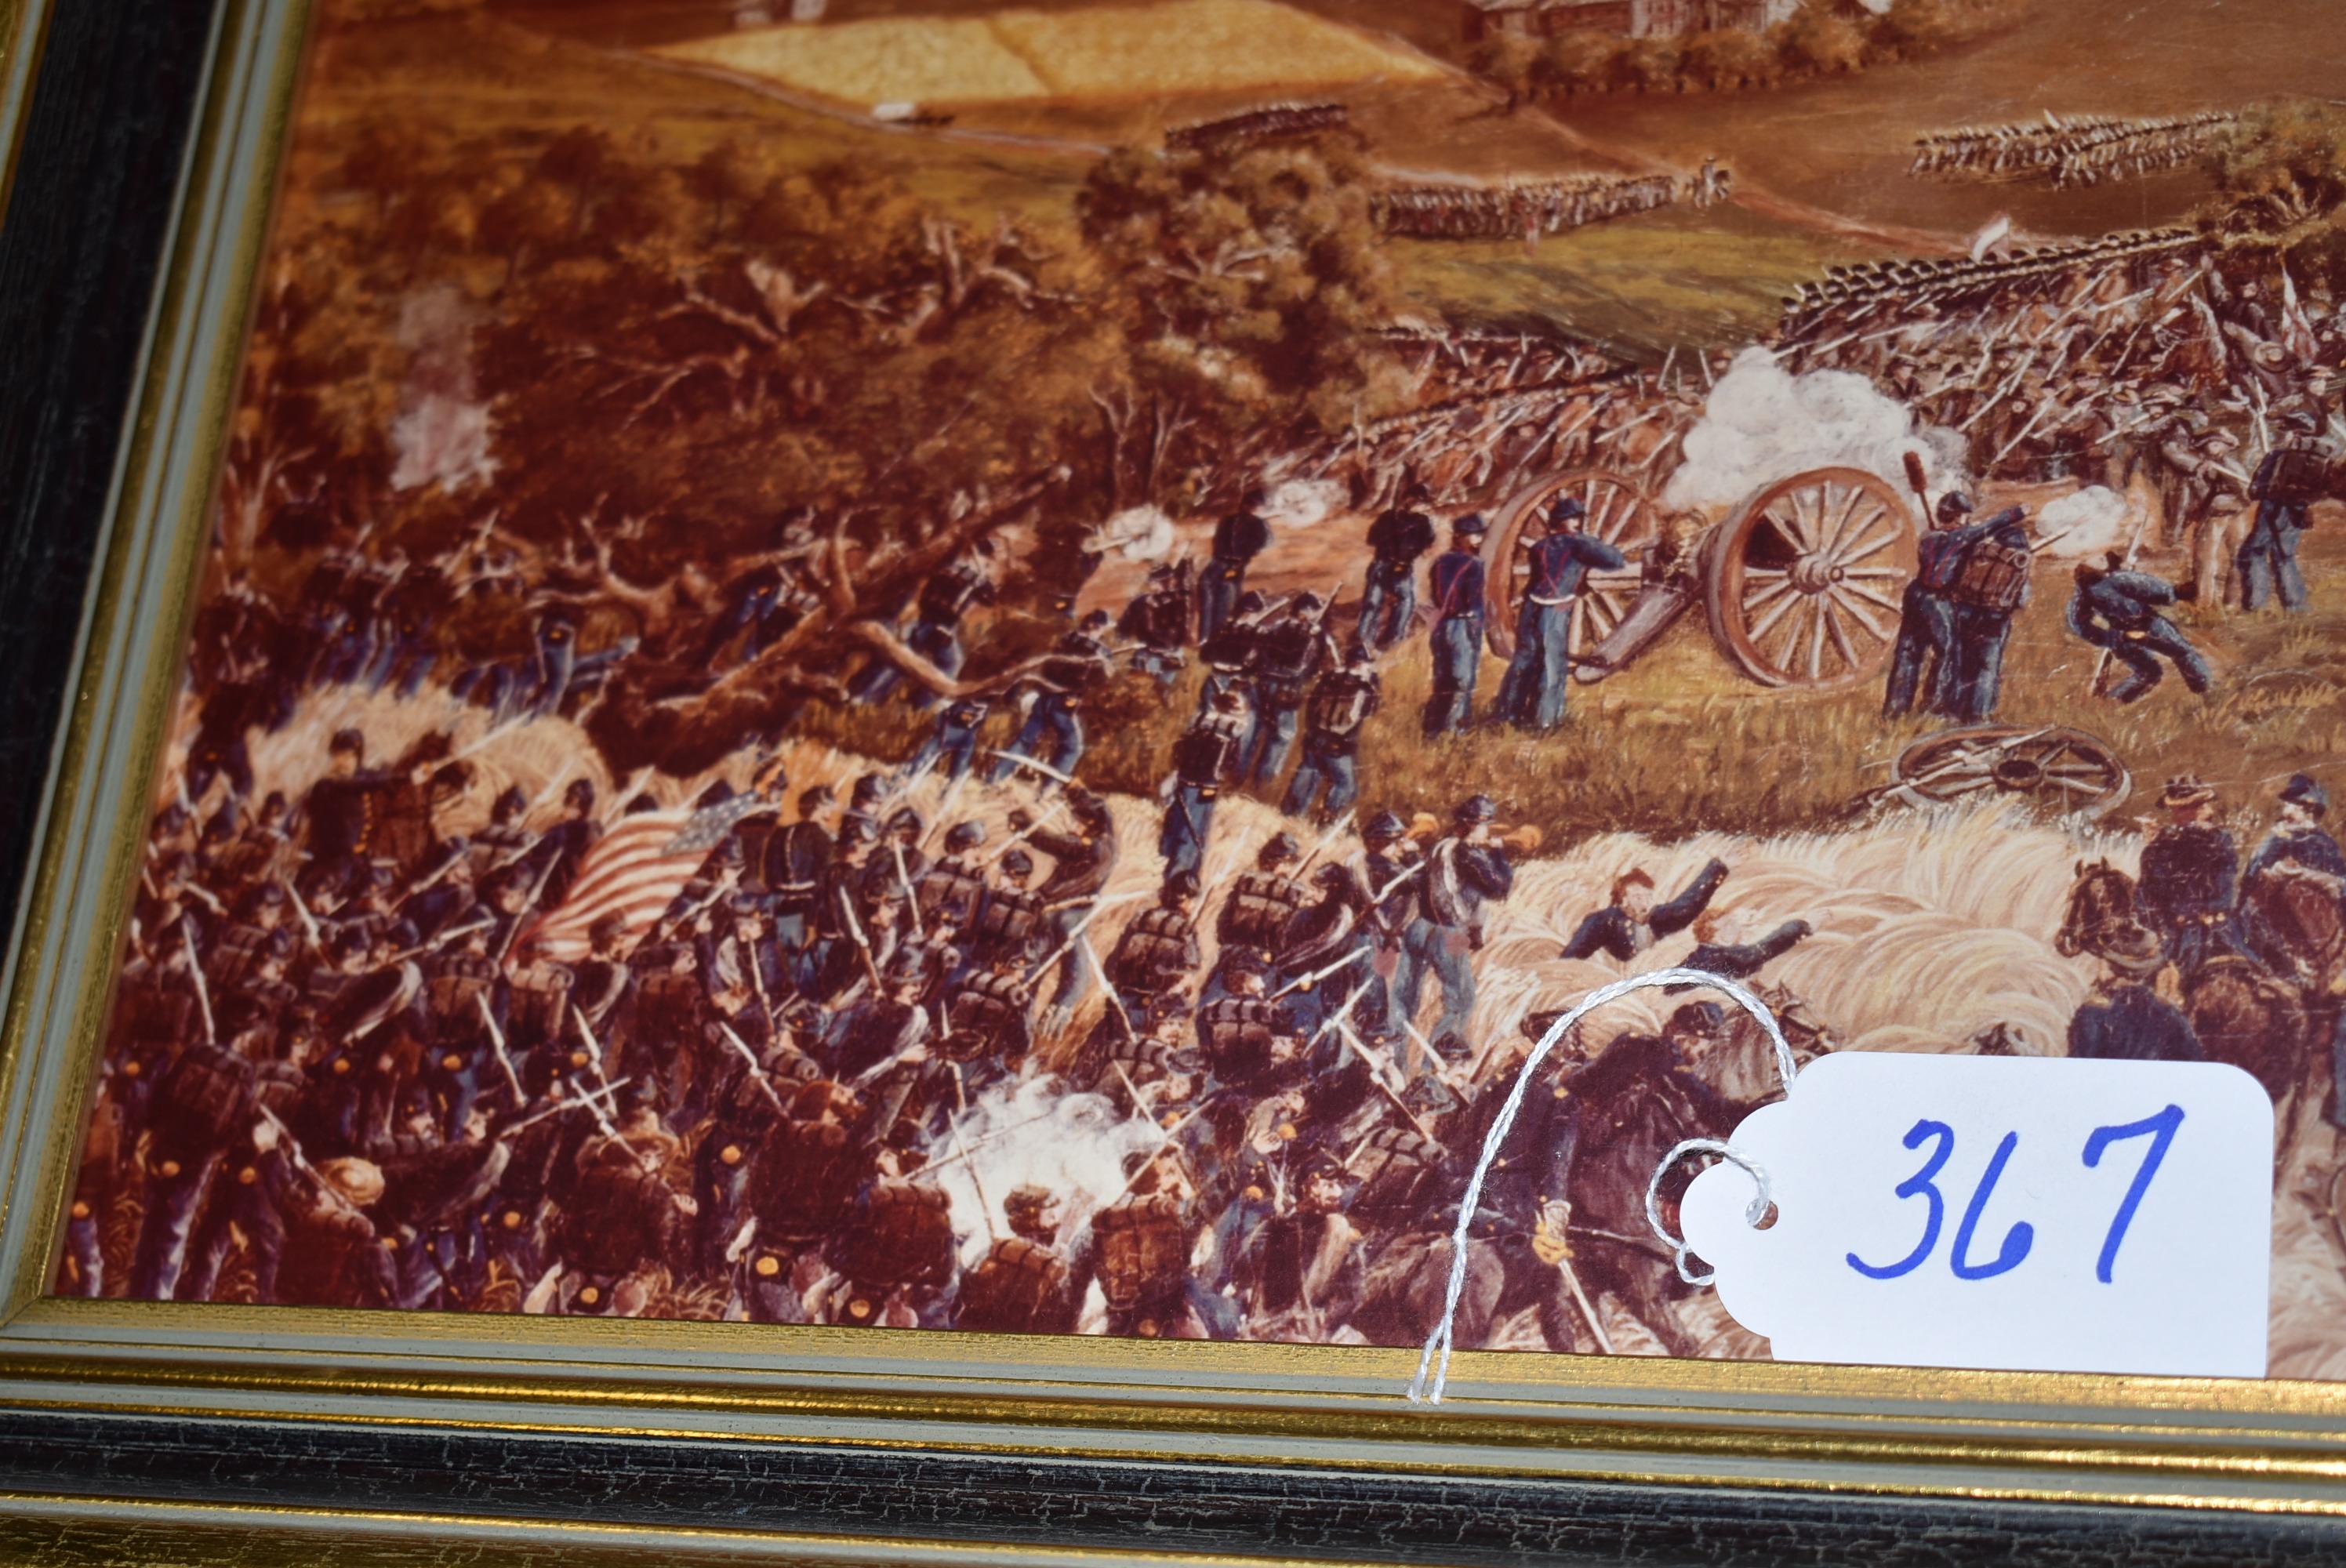 Print of painting of battle, probably Pickett's Charge at Gettysburg